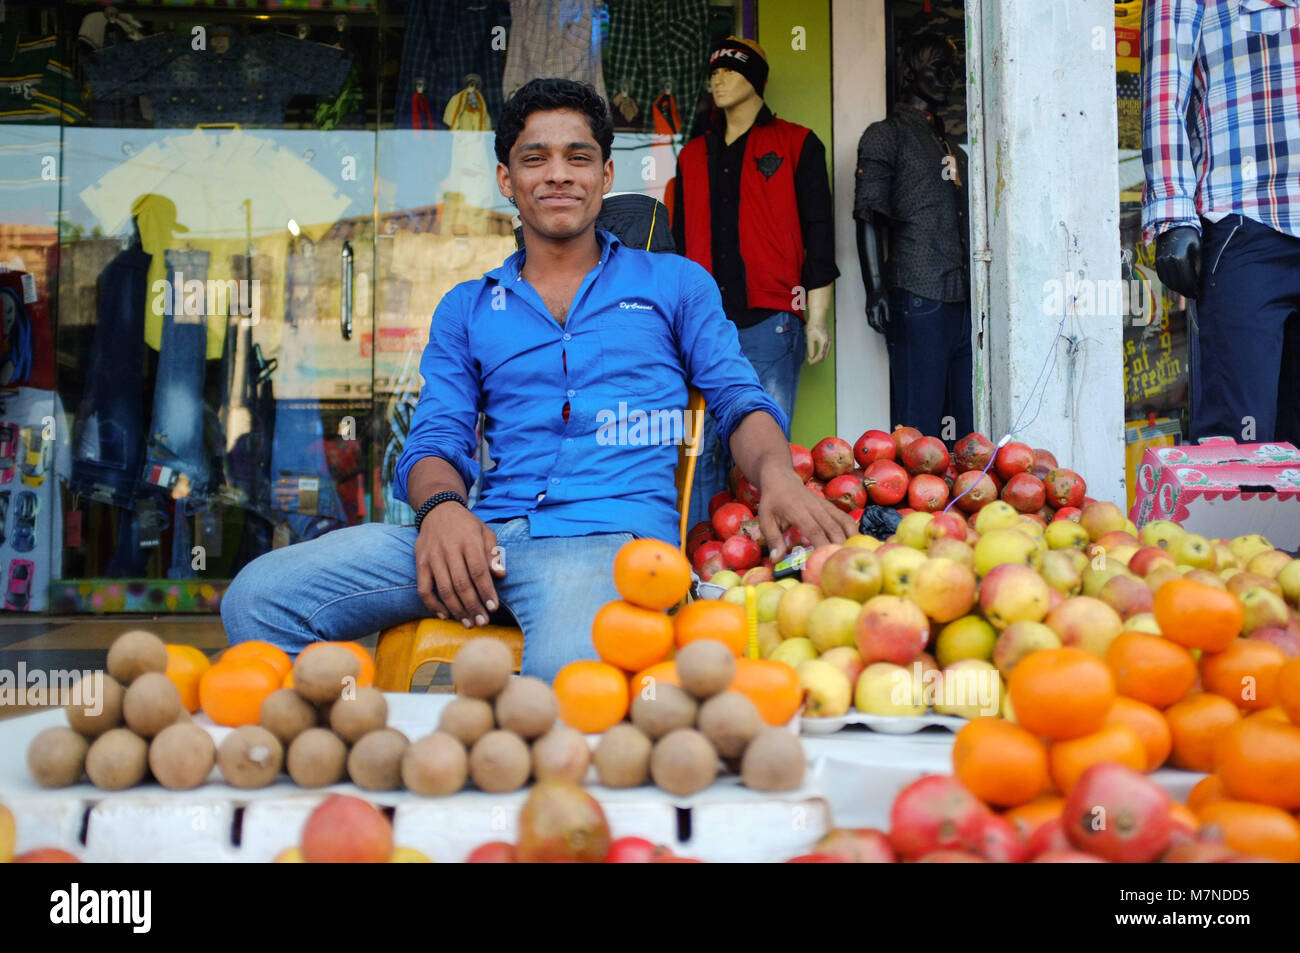 GOA, INDIA - JANUARY 27, 2015: Street fruit vendor sitting at fruit stand with a big smile. Stock Photo